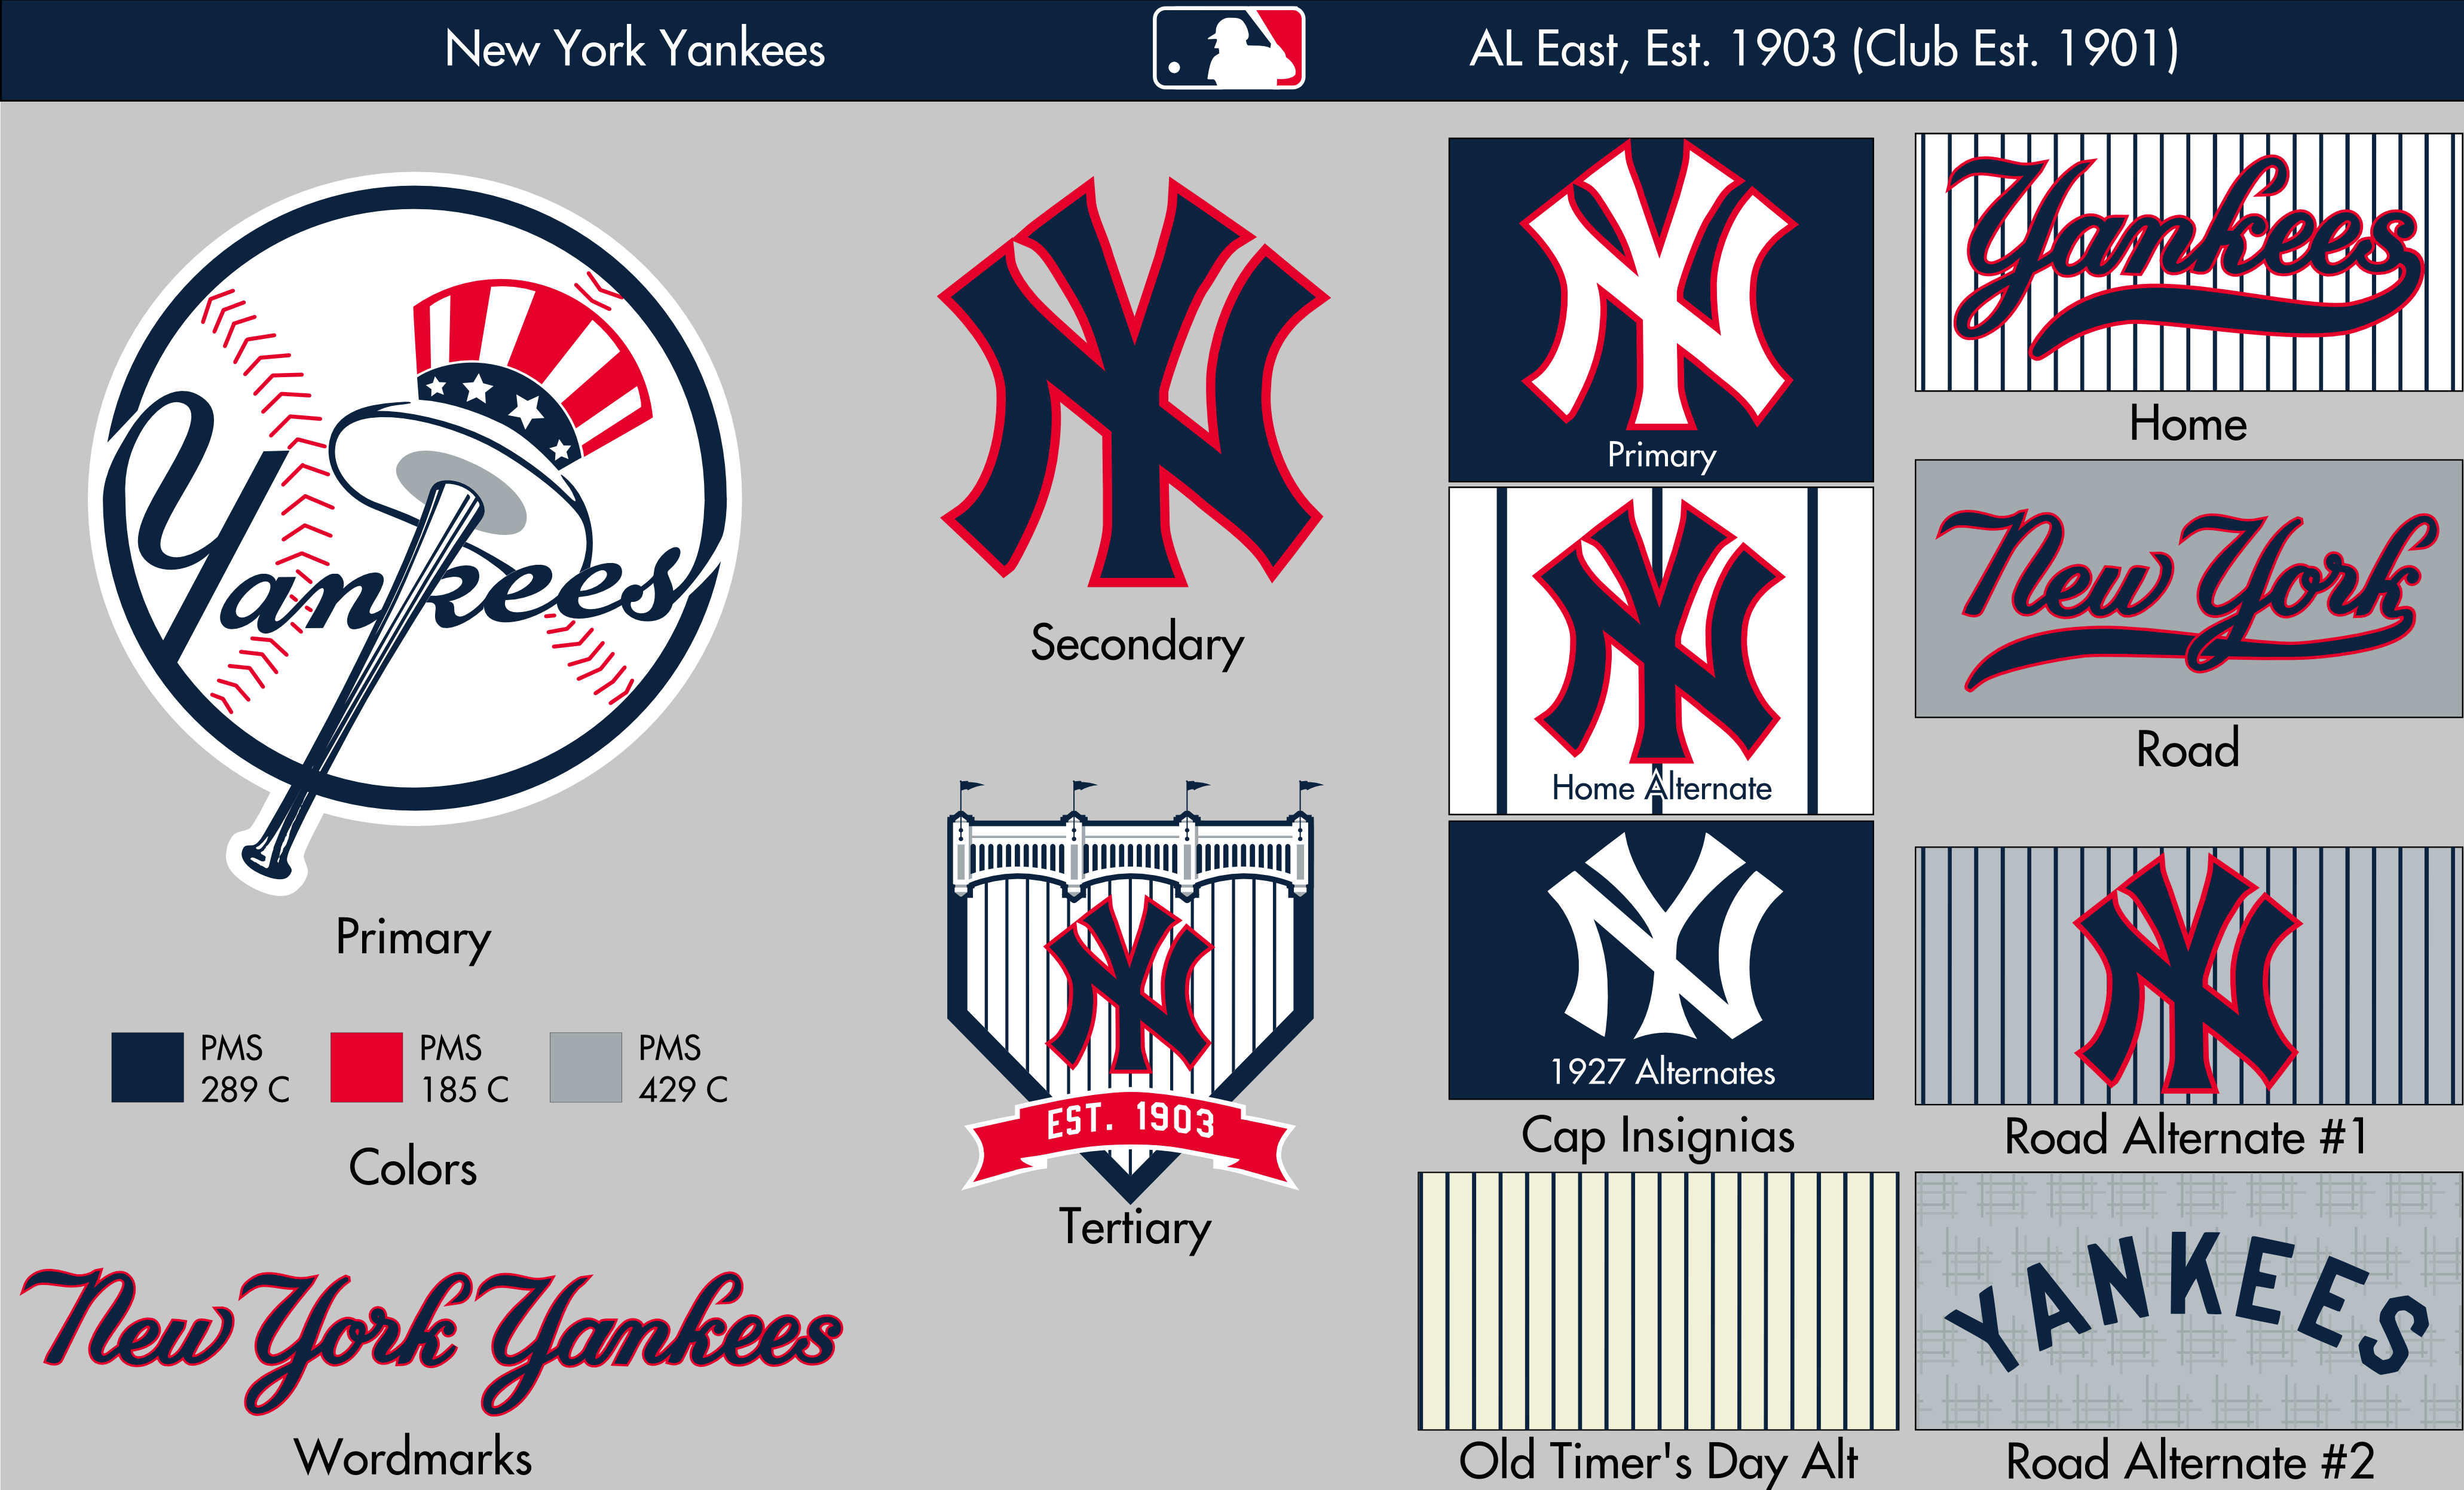 Old Yankees Logo - MLB: Project 32 Dugout Jackets Added